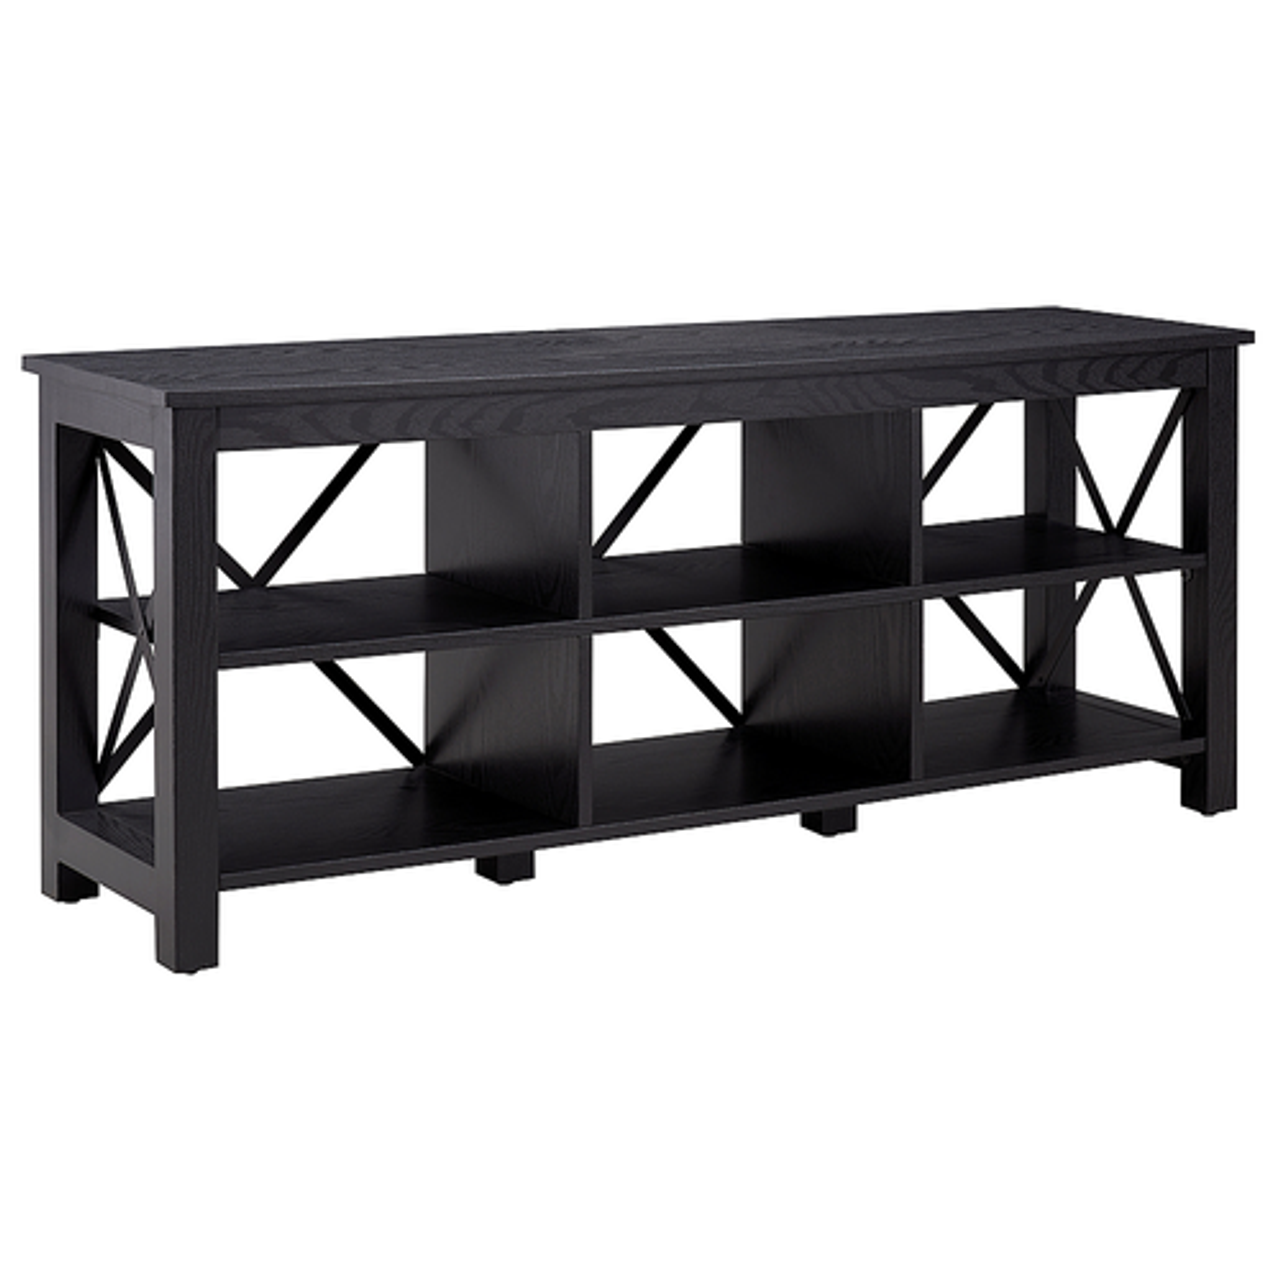 Camden&Wells - Sawyer TV Stand for TVs up to 65" - Black